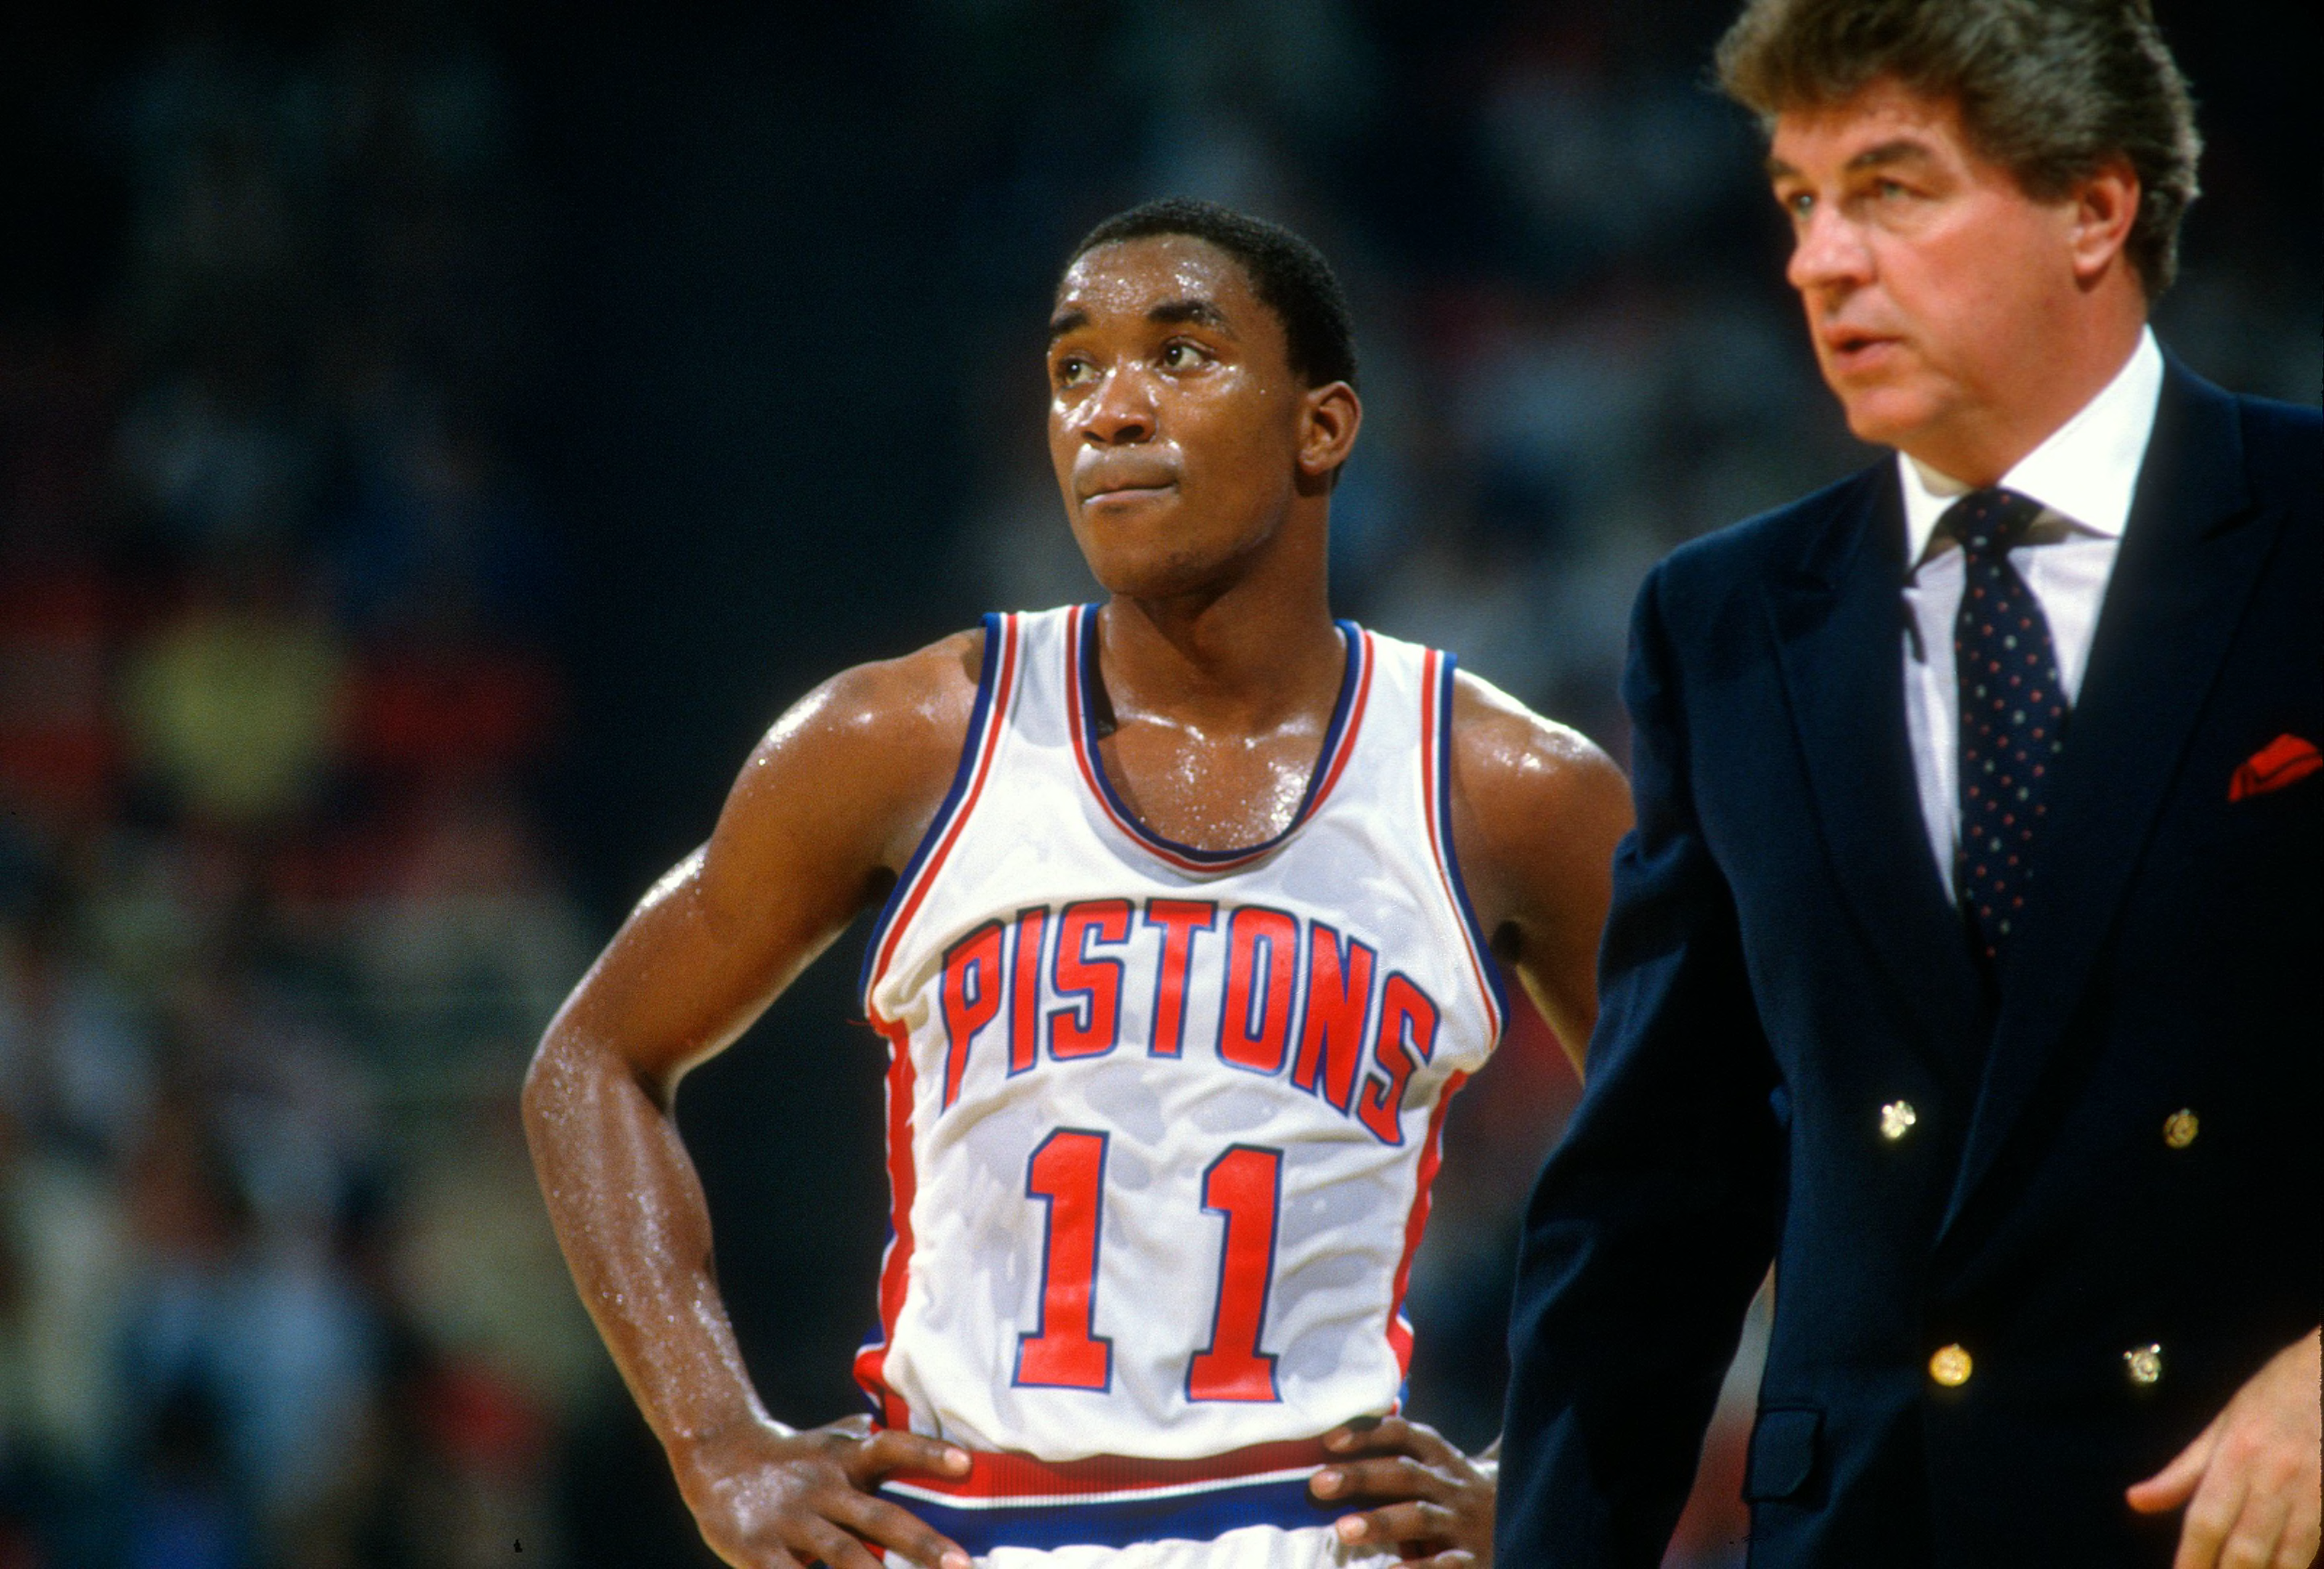 Detroit Pistons: Ranking the top jerseys of all-time